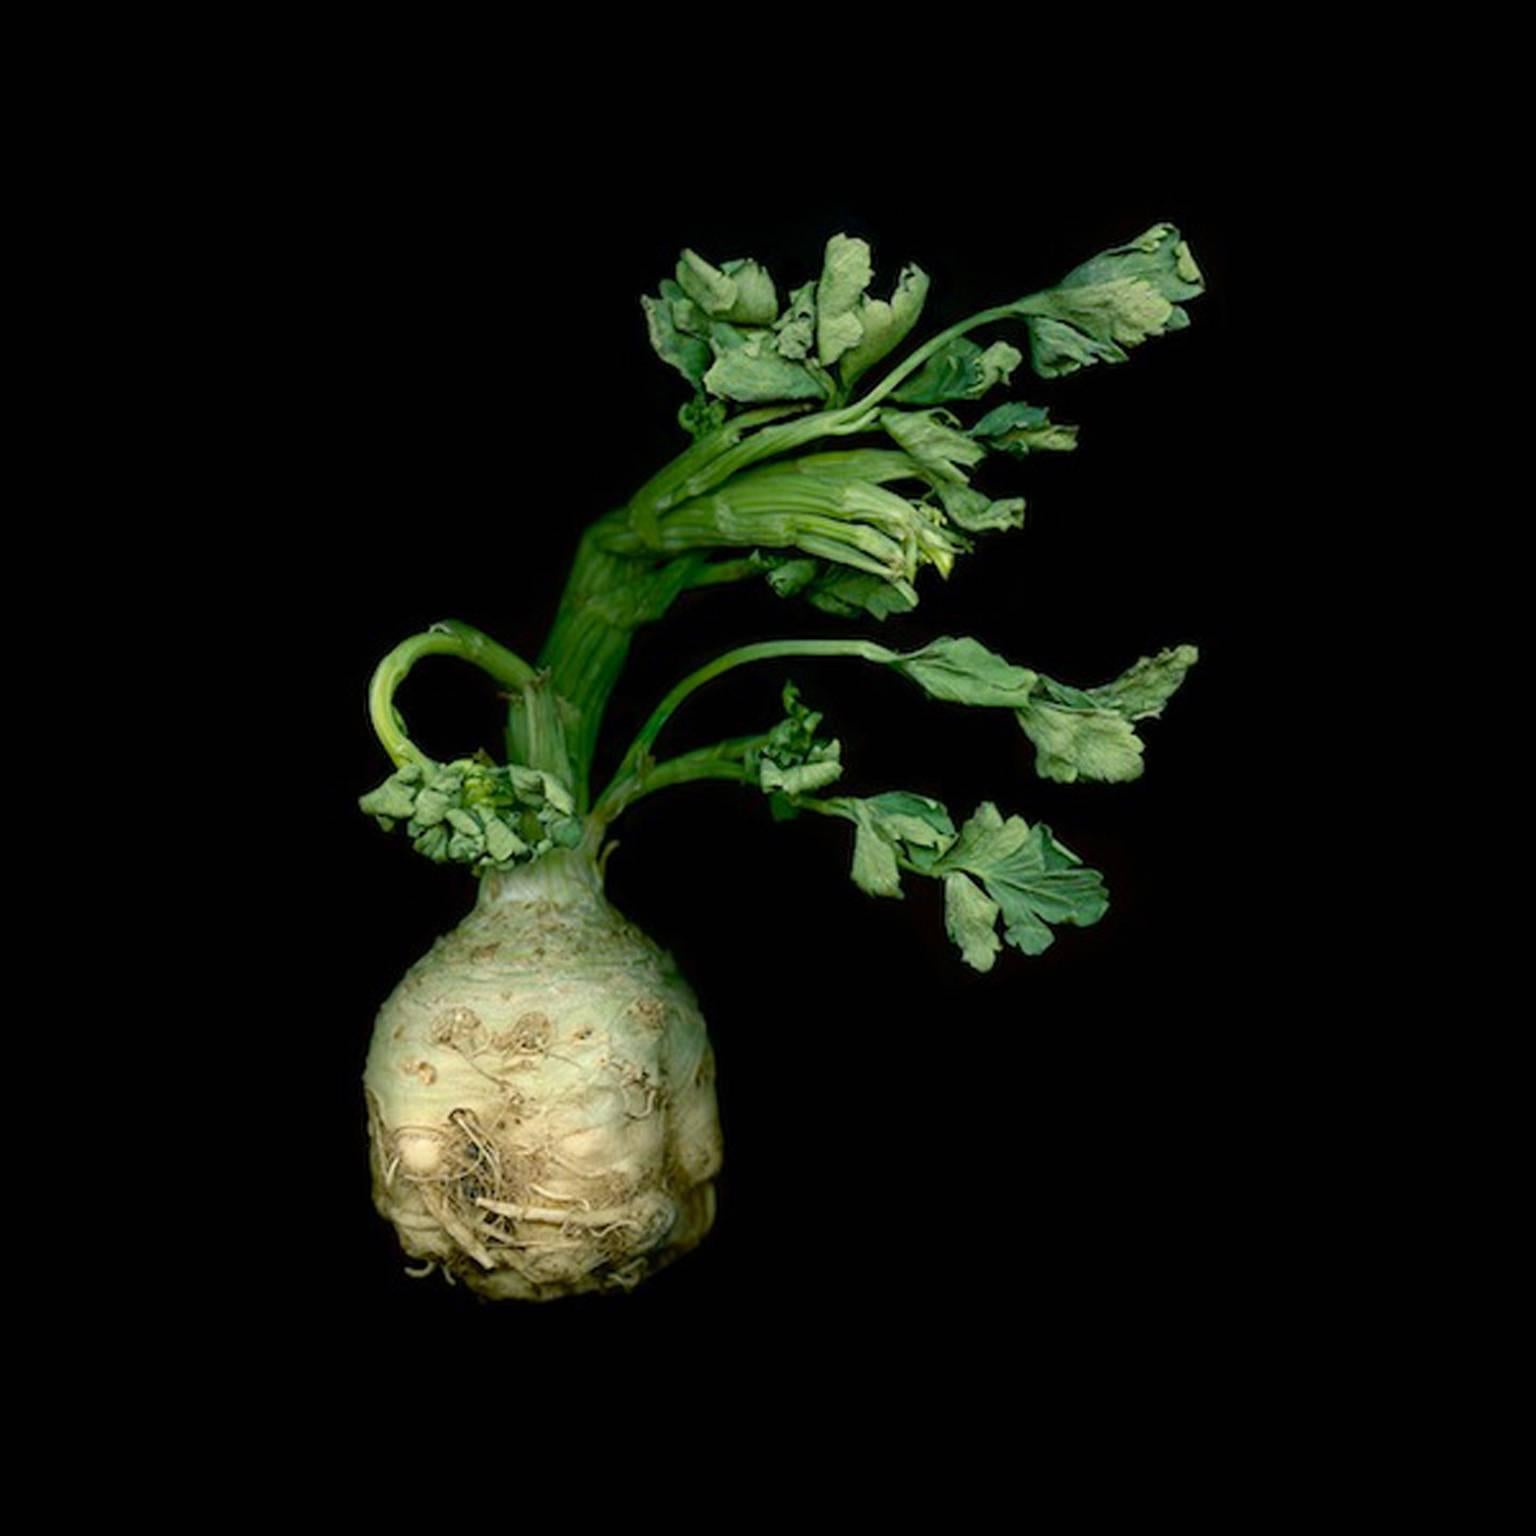 Four, still life prints by Jerry Freedner
18 x 18 inches each, $600 each 

Three Garlic
Celeriac 116
Radish
Onion 1

Statement from the artist:
In the sixties I studied photography at the New School in NYC, and then with Lisette Model. I've enjoyed